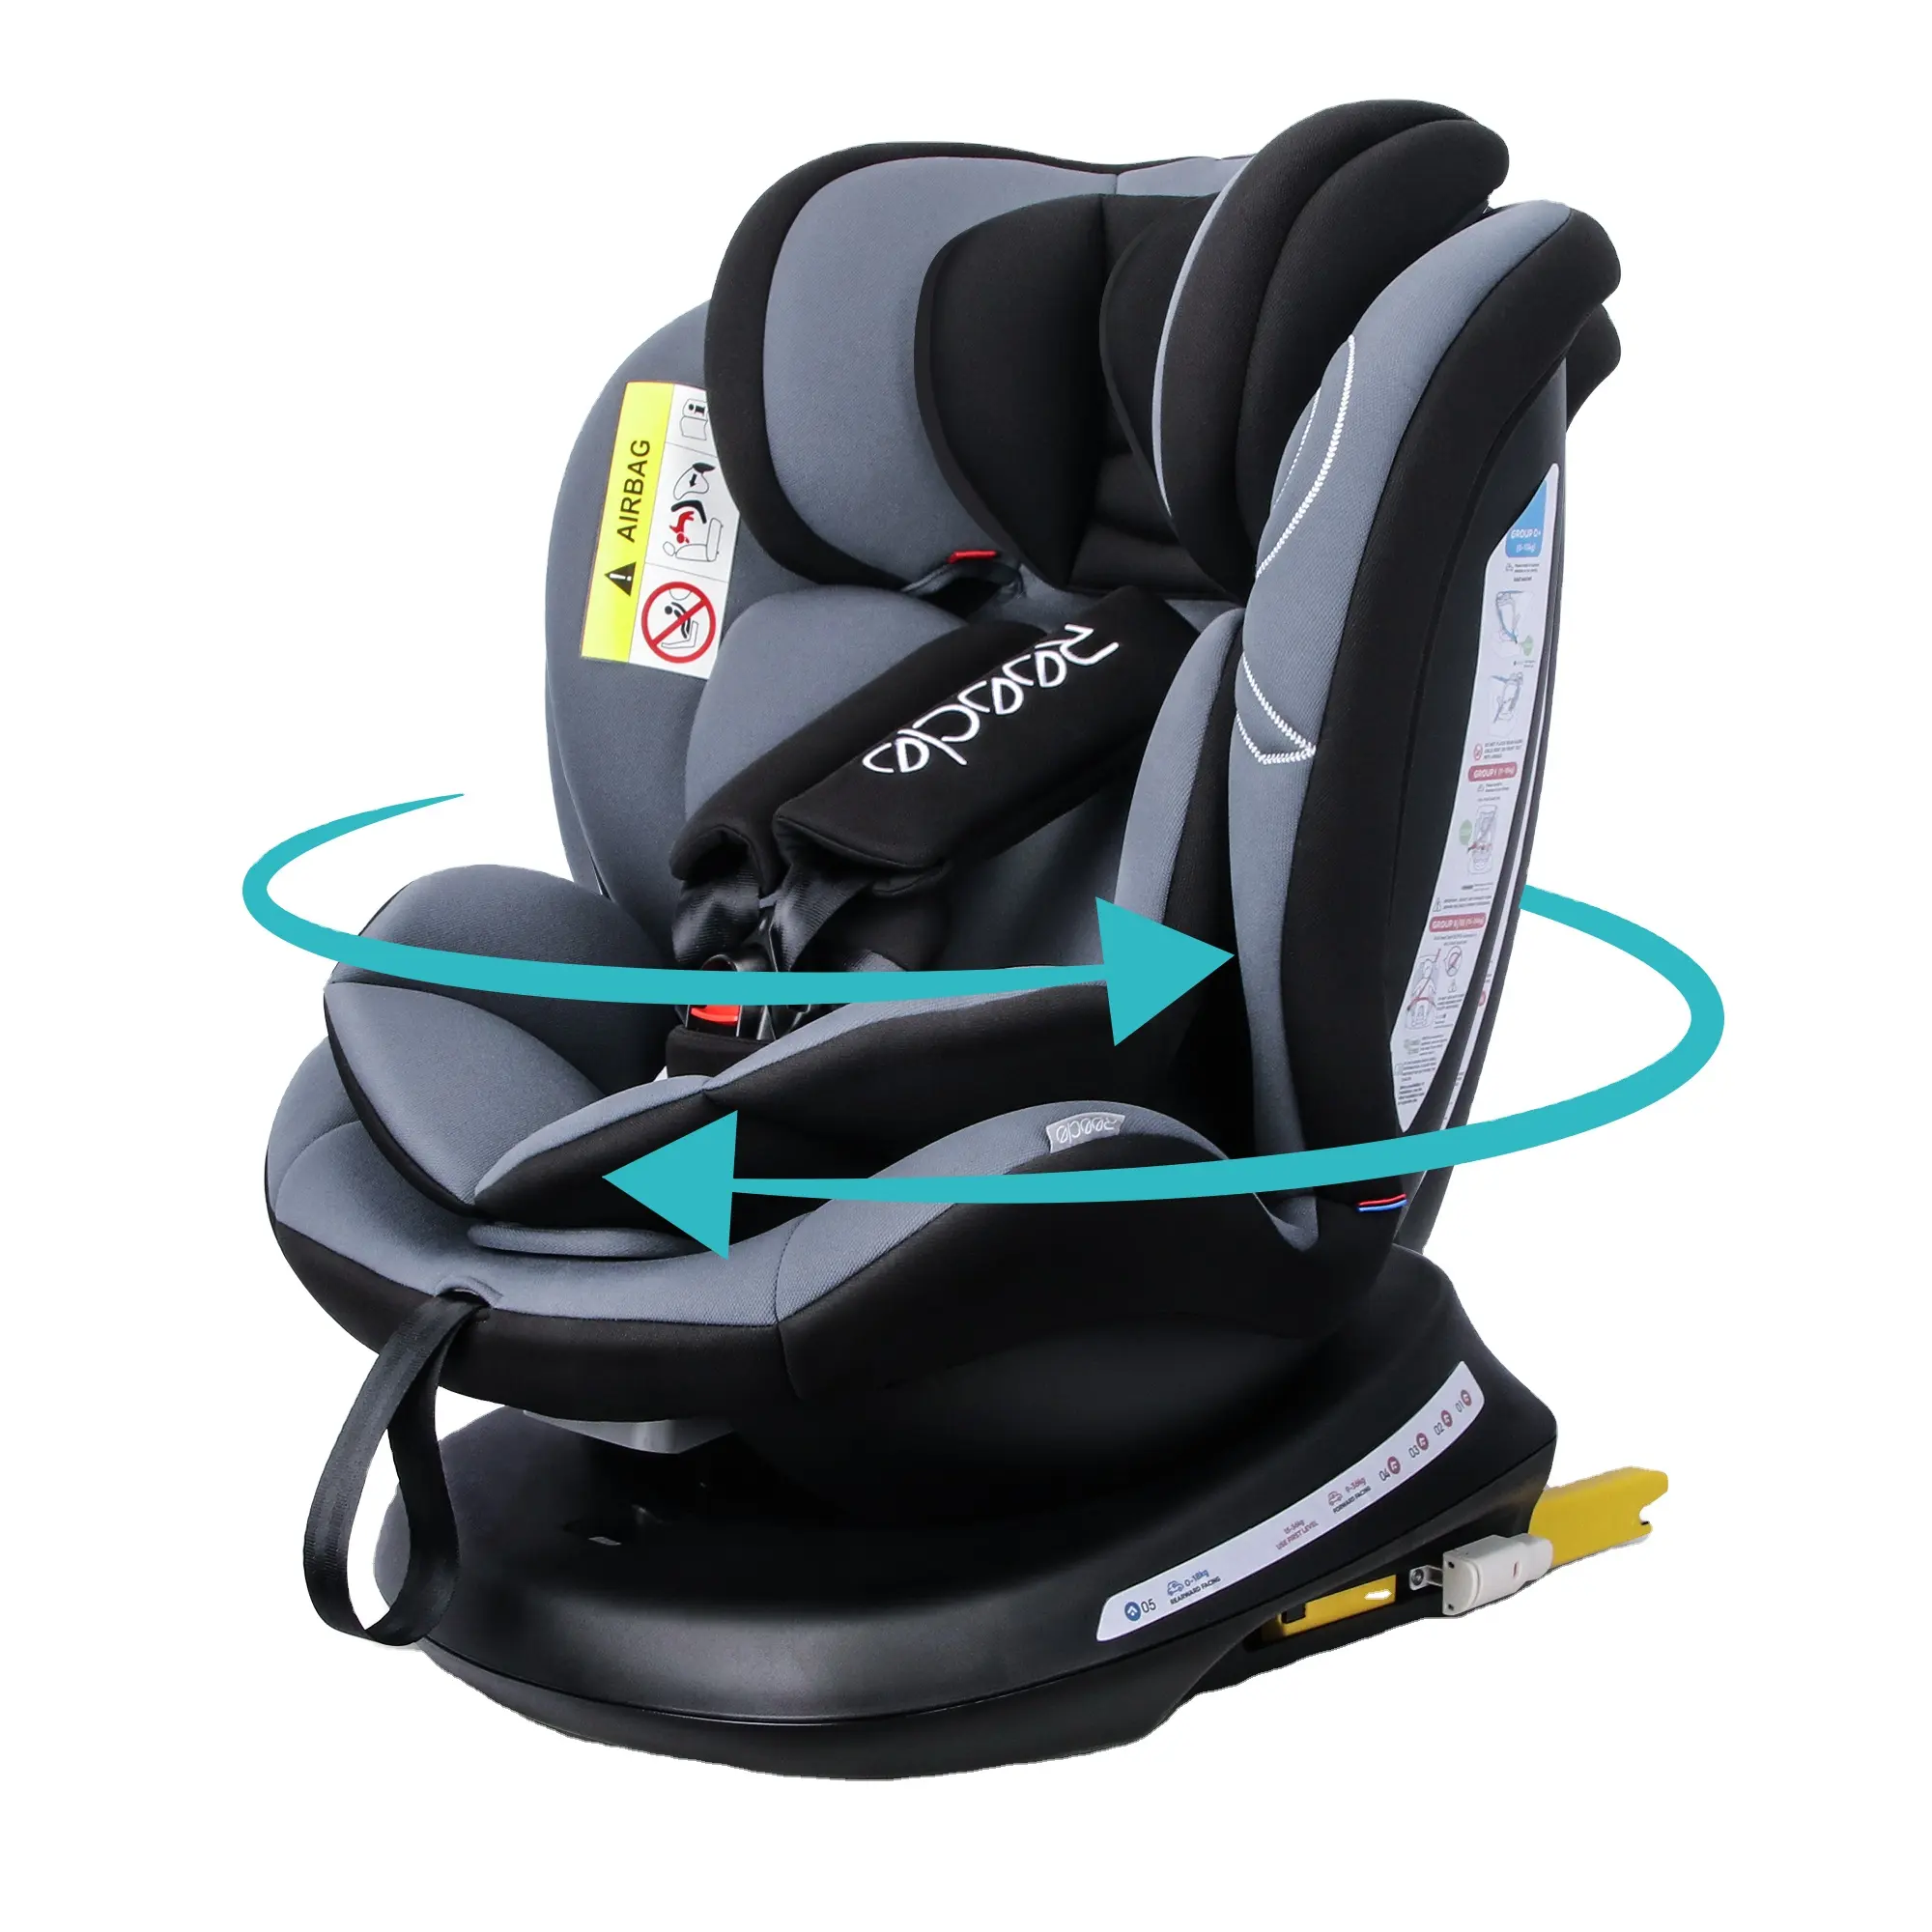 Quality Guarantee 360 Degree Isofix Travel Safety 0-36kg Carseats Baby Kids Infant Car Seats